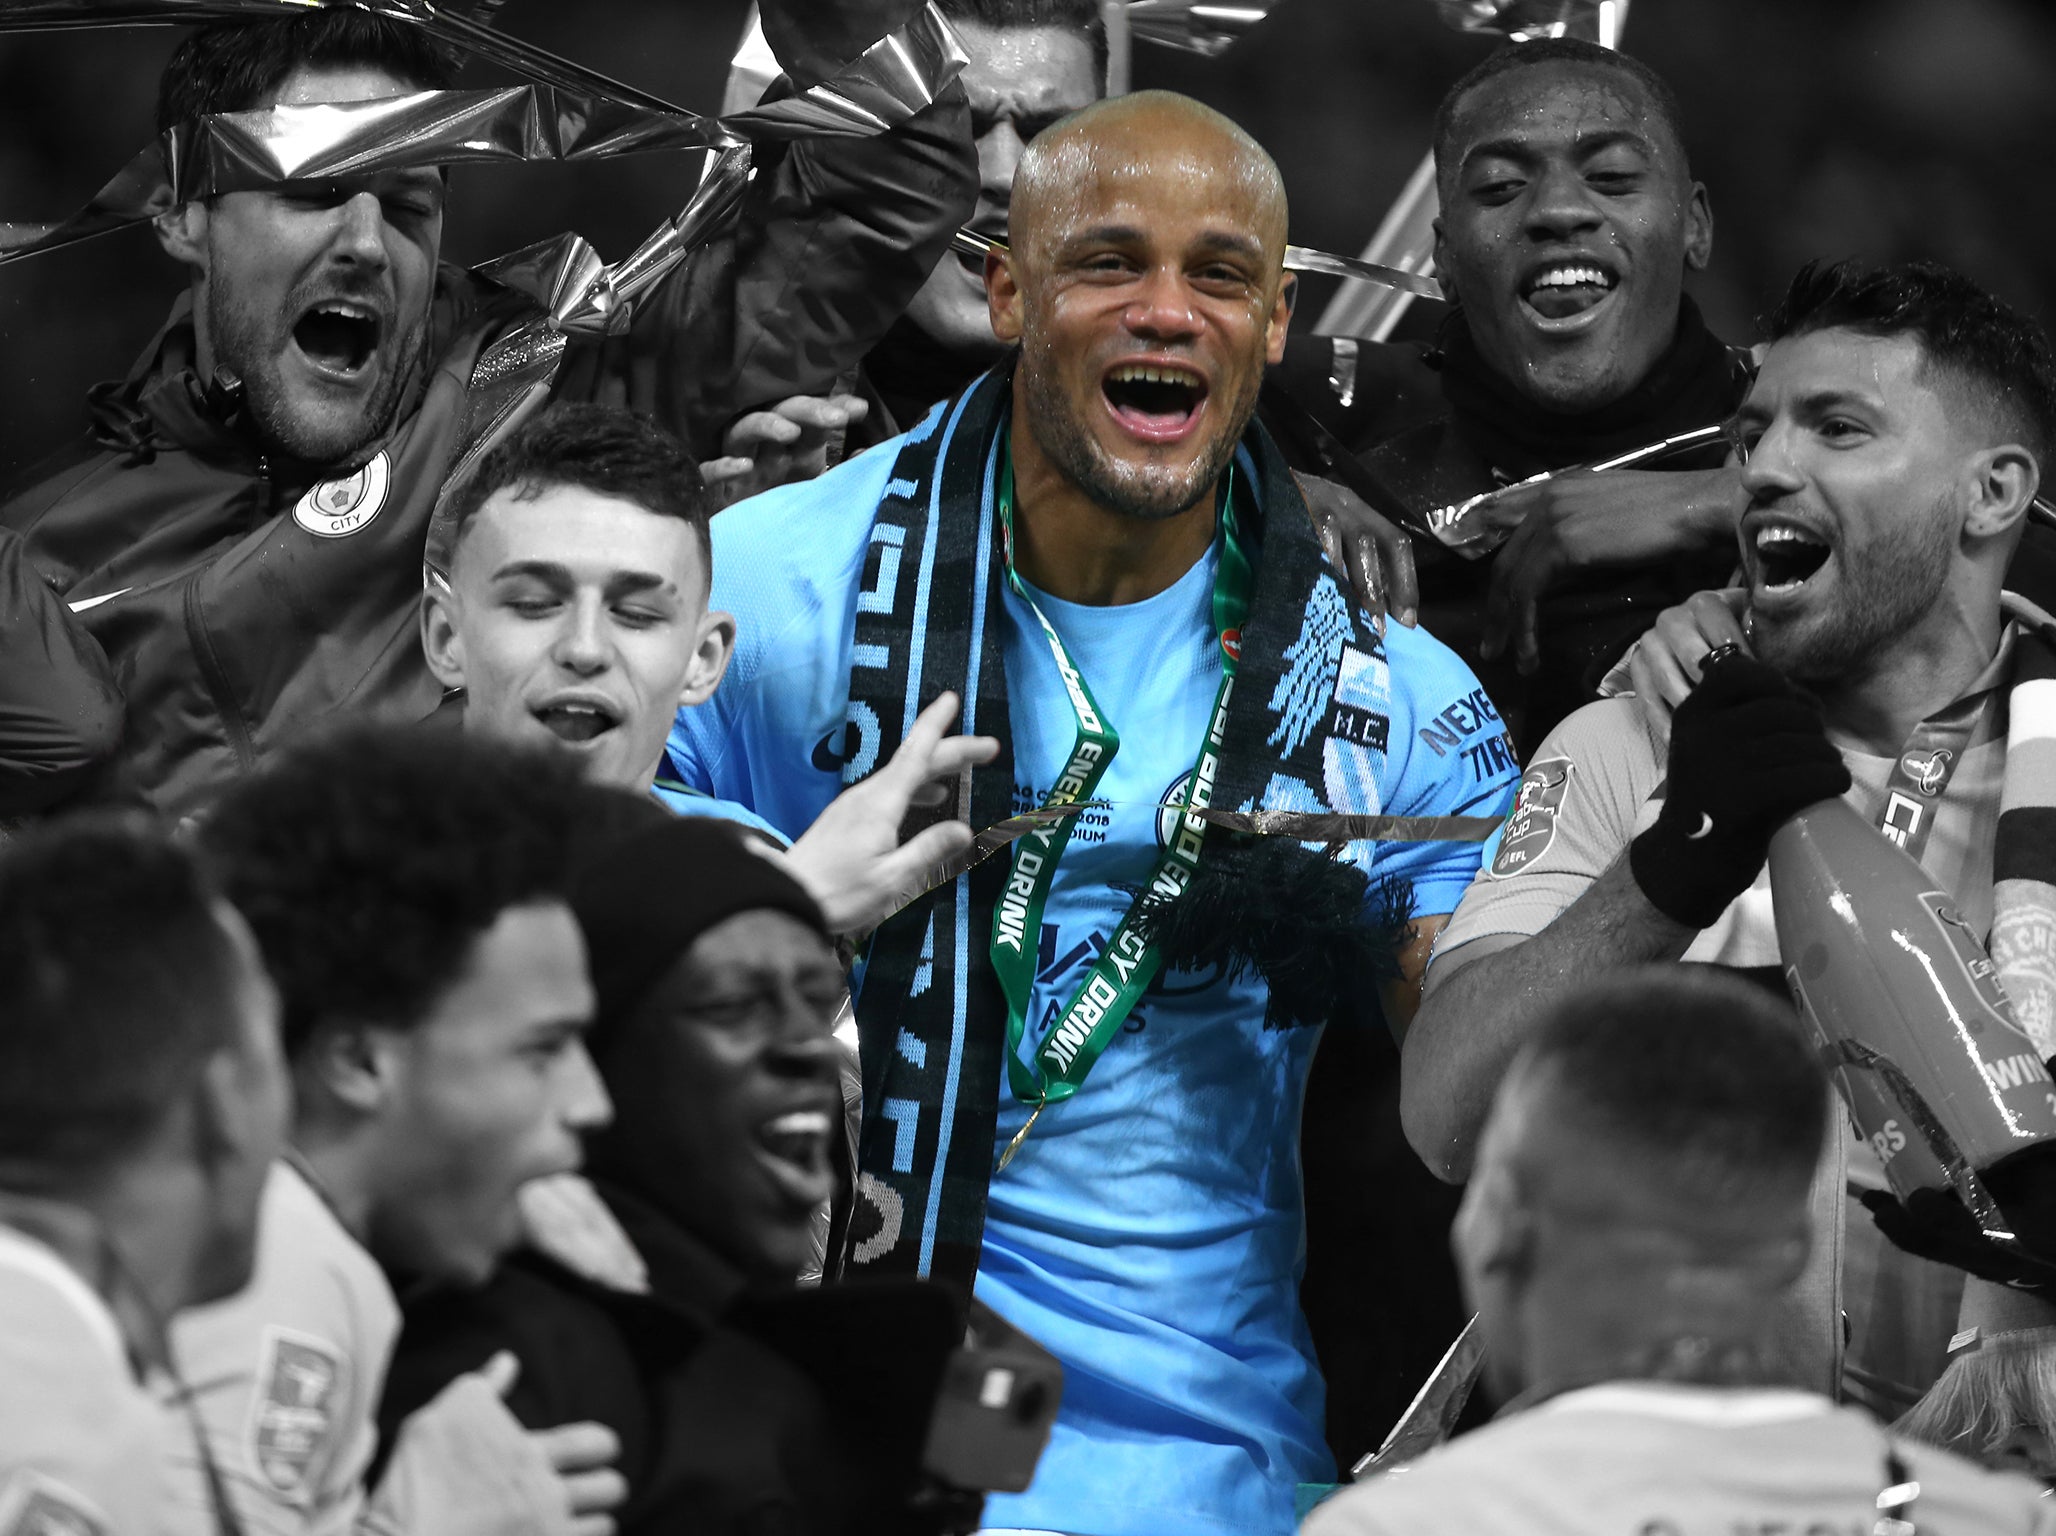 Vincent Kompany led from the front for Manchester City